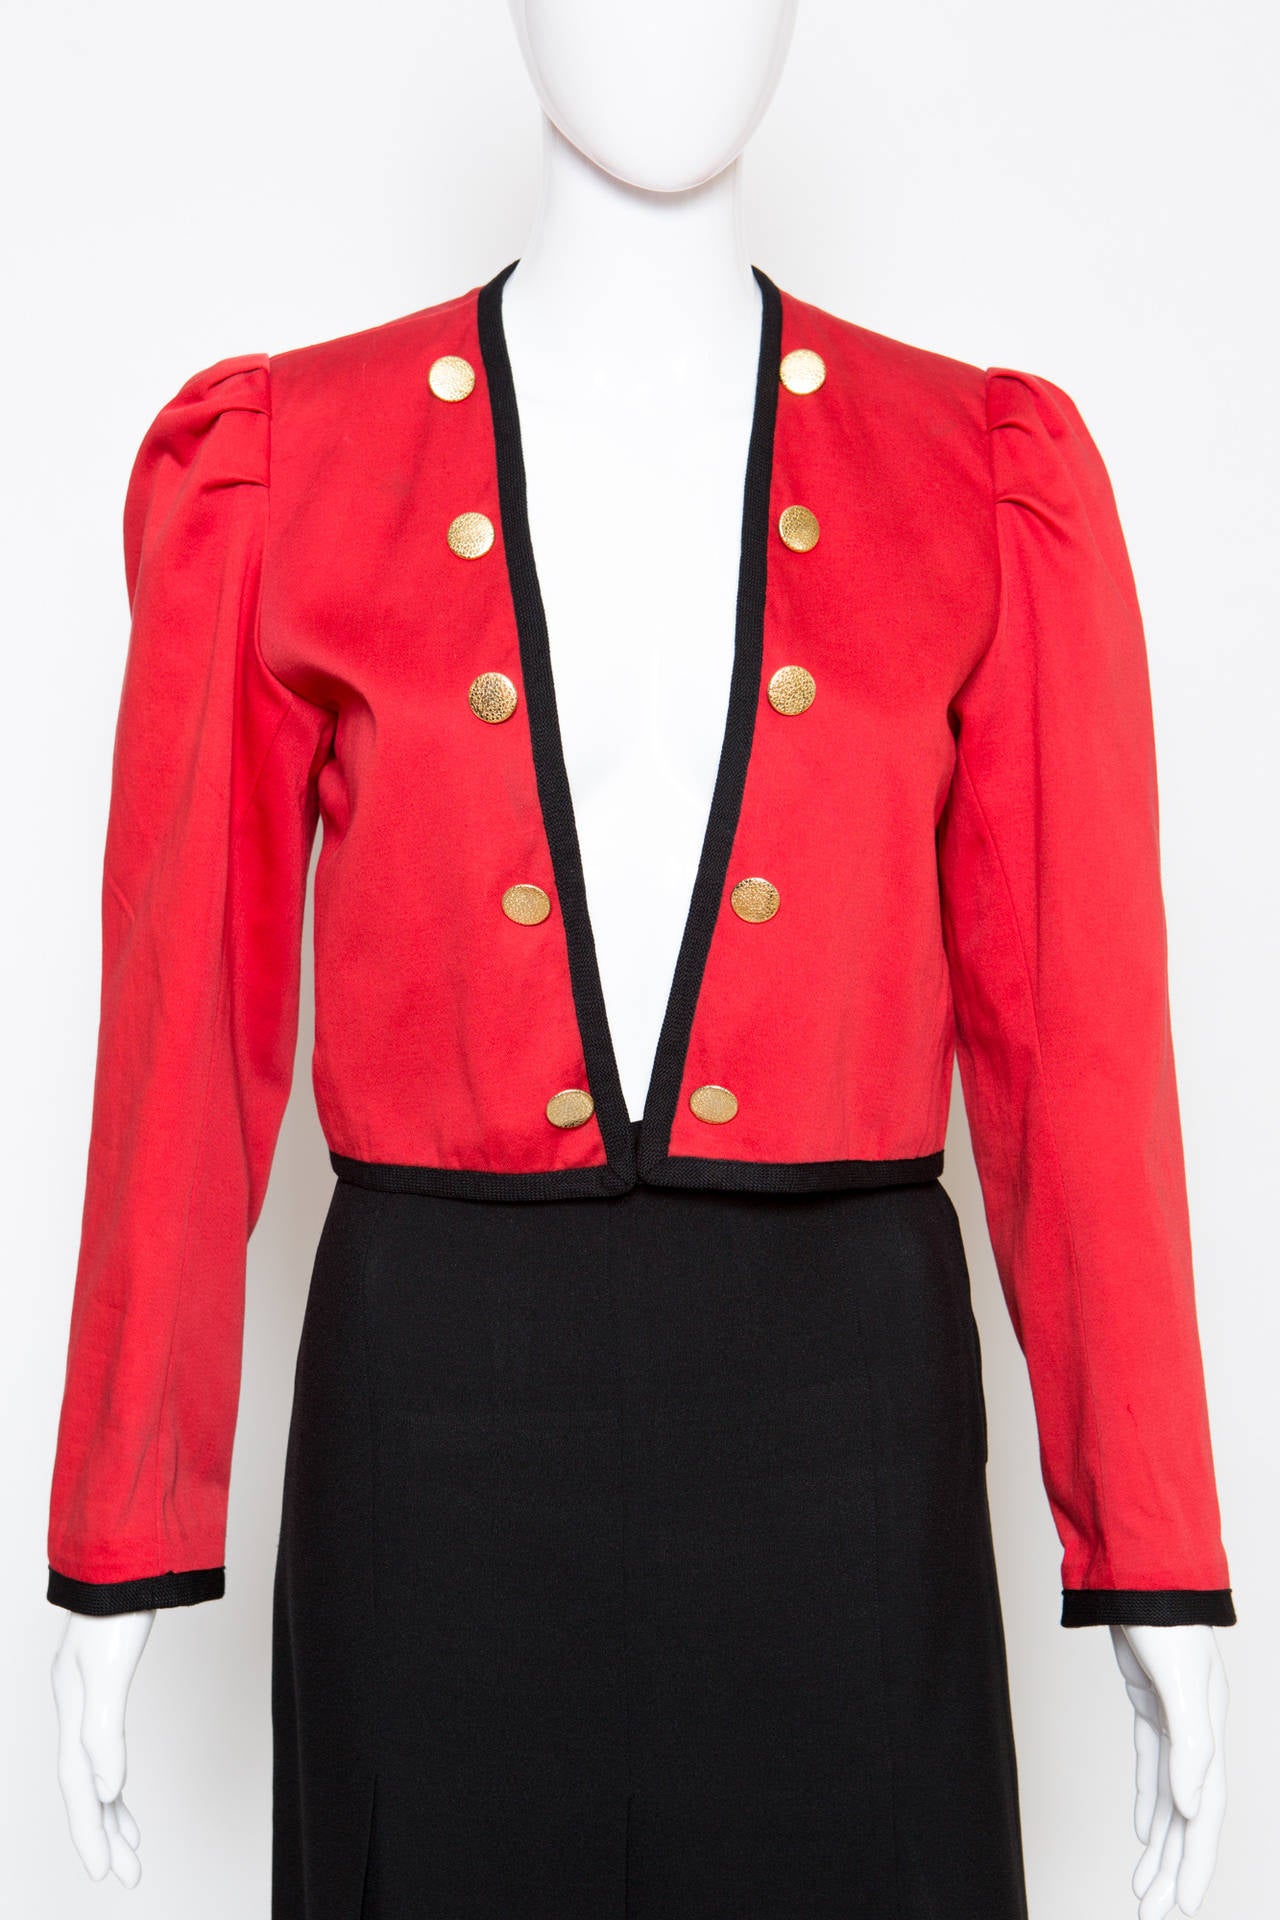 1980s Yves Saint Laurent red cotton bolero,featuring black braid details around neck & cuffs, long sleeves,fully lined,fancy pleated shoulders, gold-tone decorative buttons at front. The bolero gets an edge to edge opening with an inside bottom